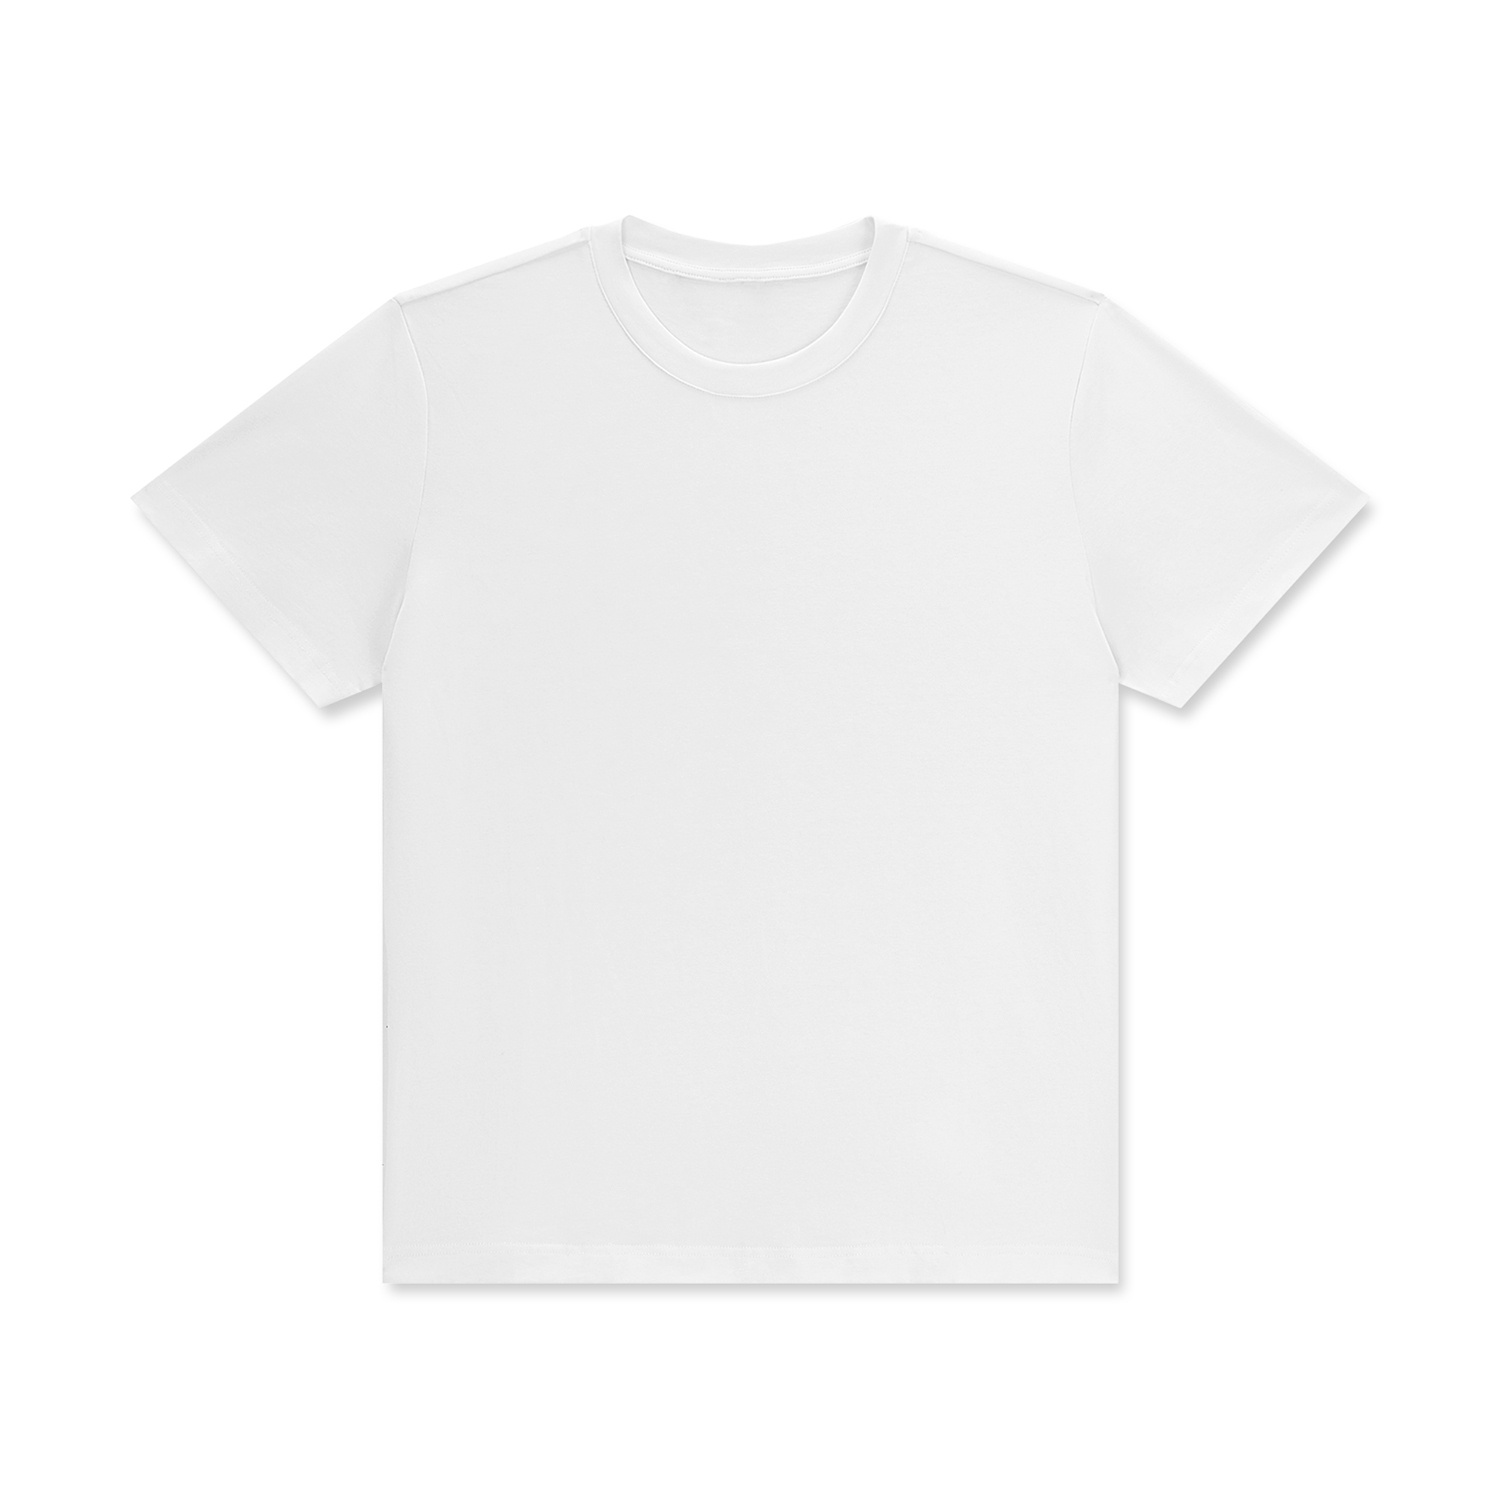 Unisex Classic Crew Neck Cotton T-Shirt for Retail Stores - Print On Demand | HugePOD